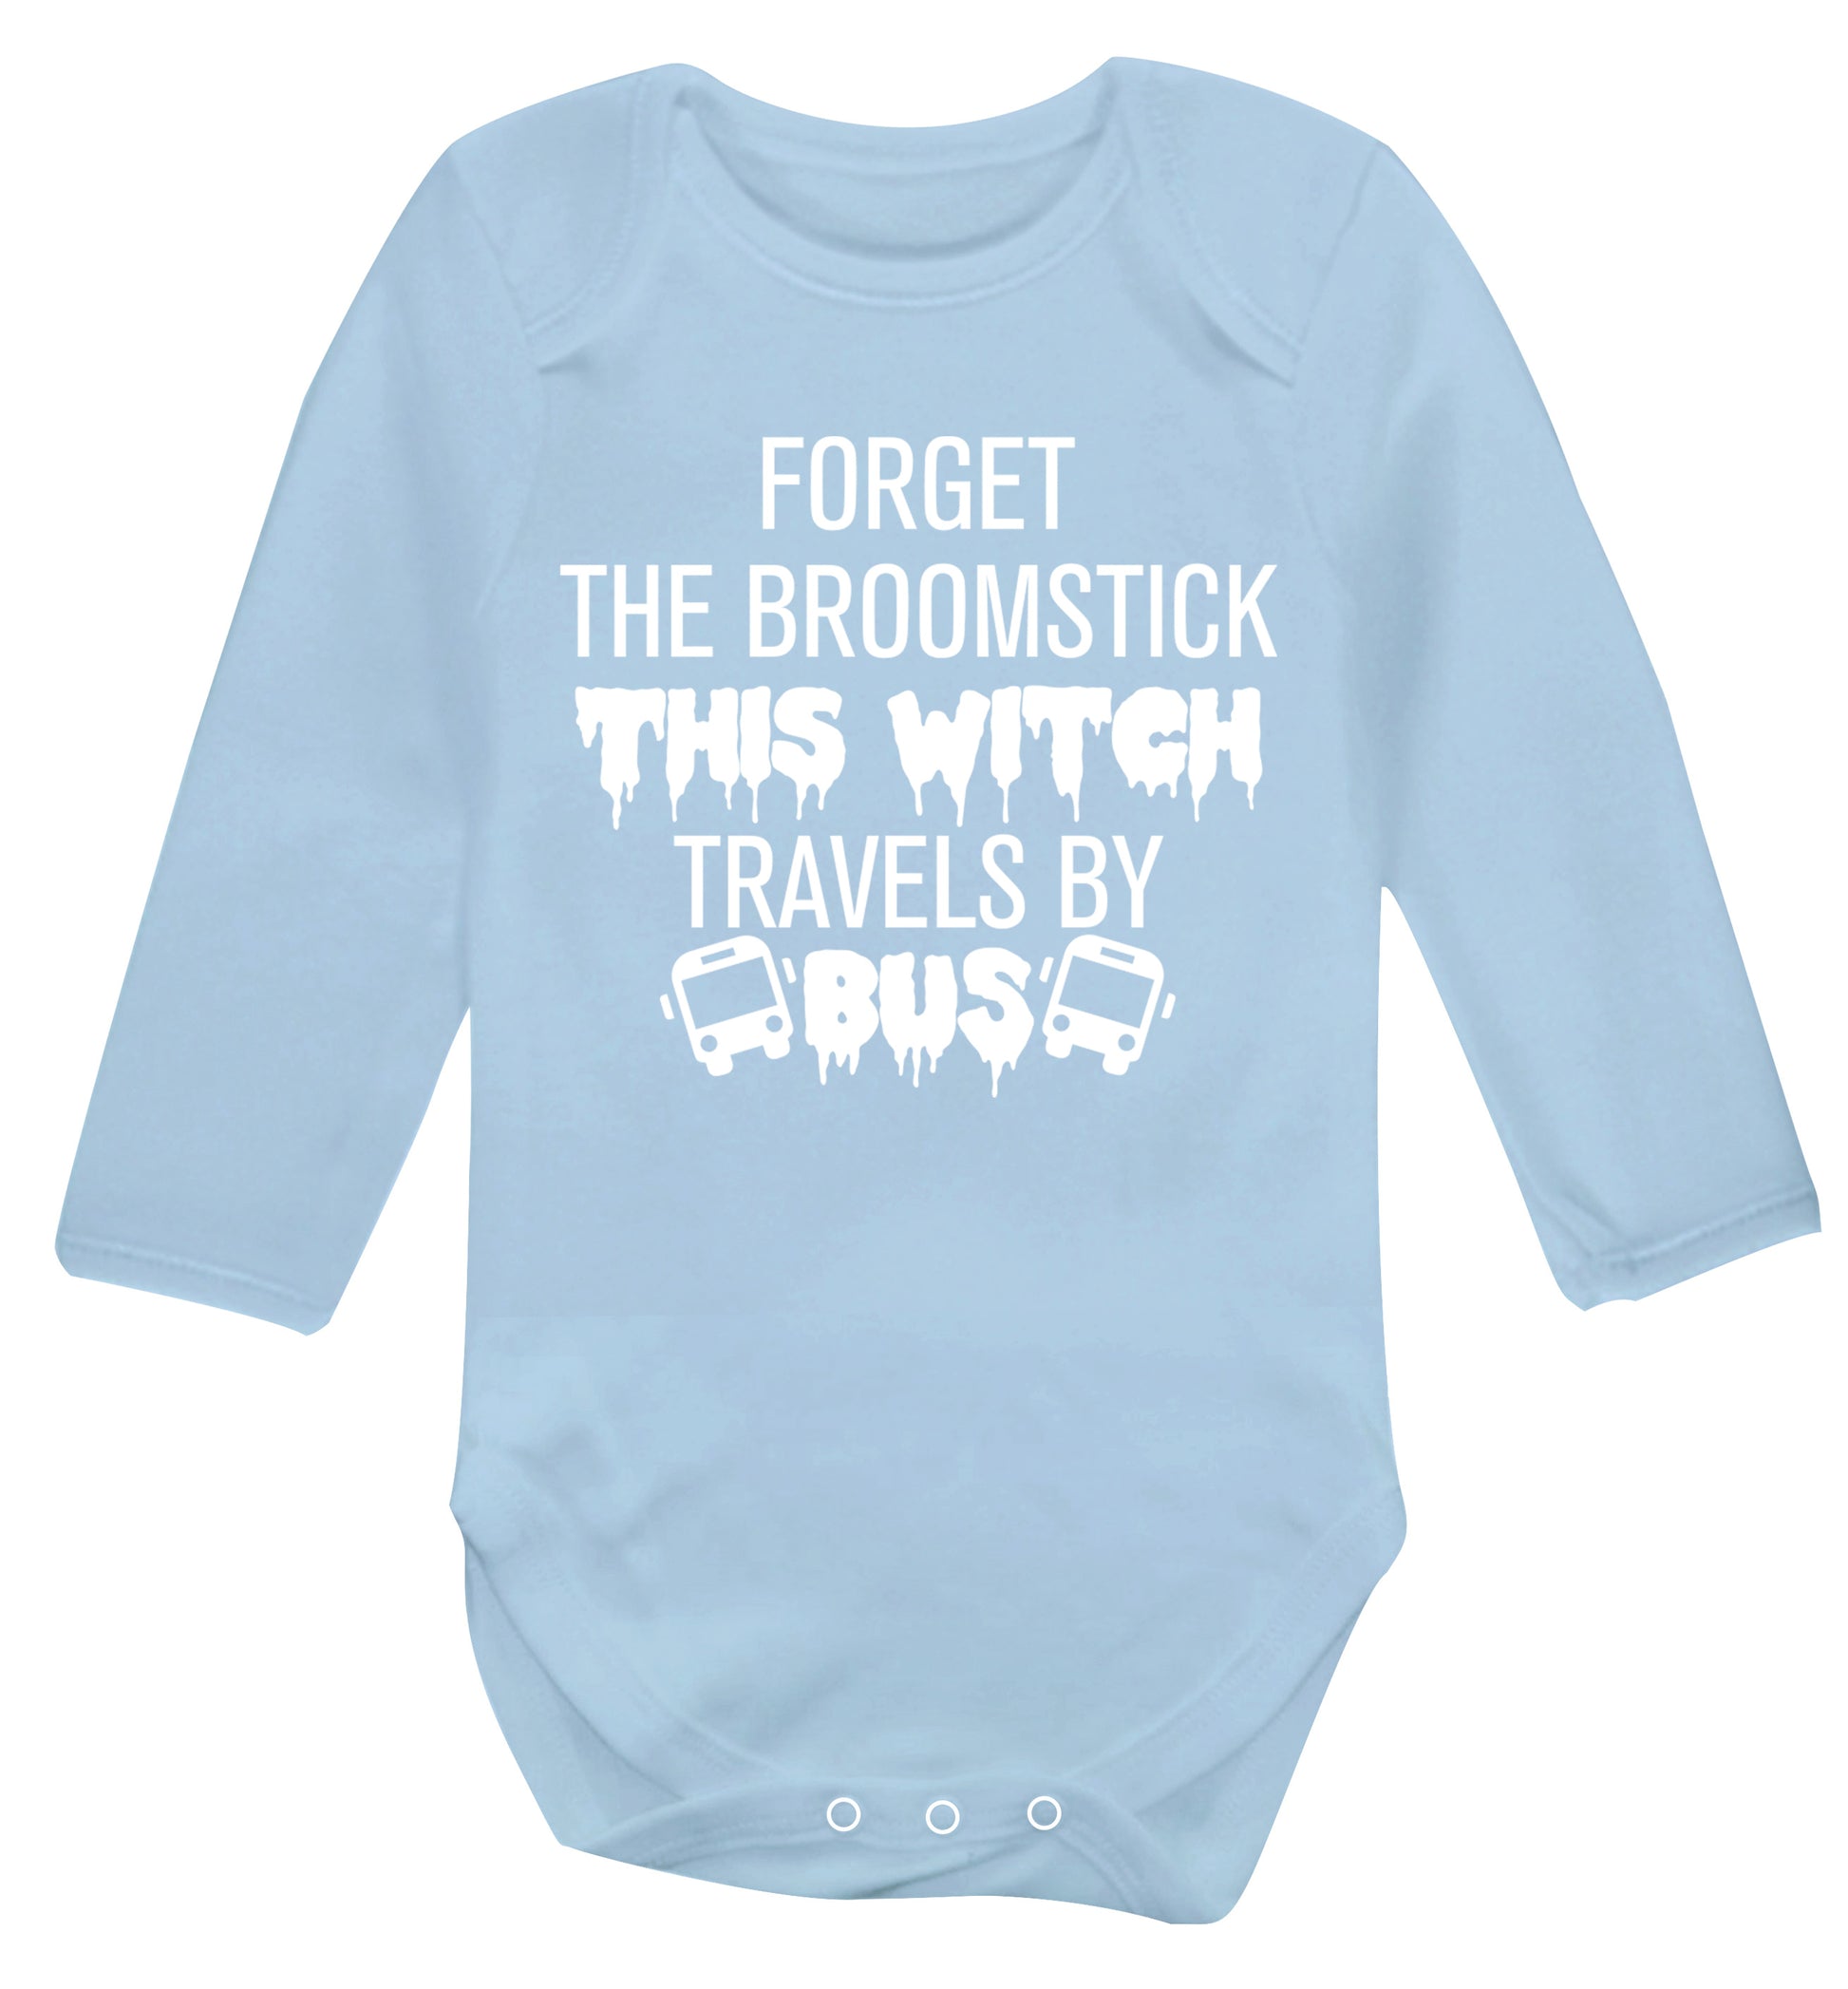 Forget the broomstick this witch travels by bus Baby Vest long sleeved pale blue 6-12 months